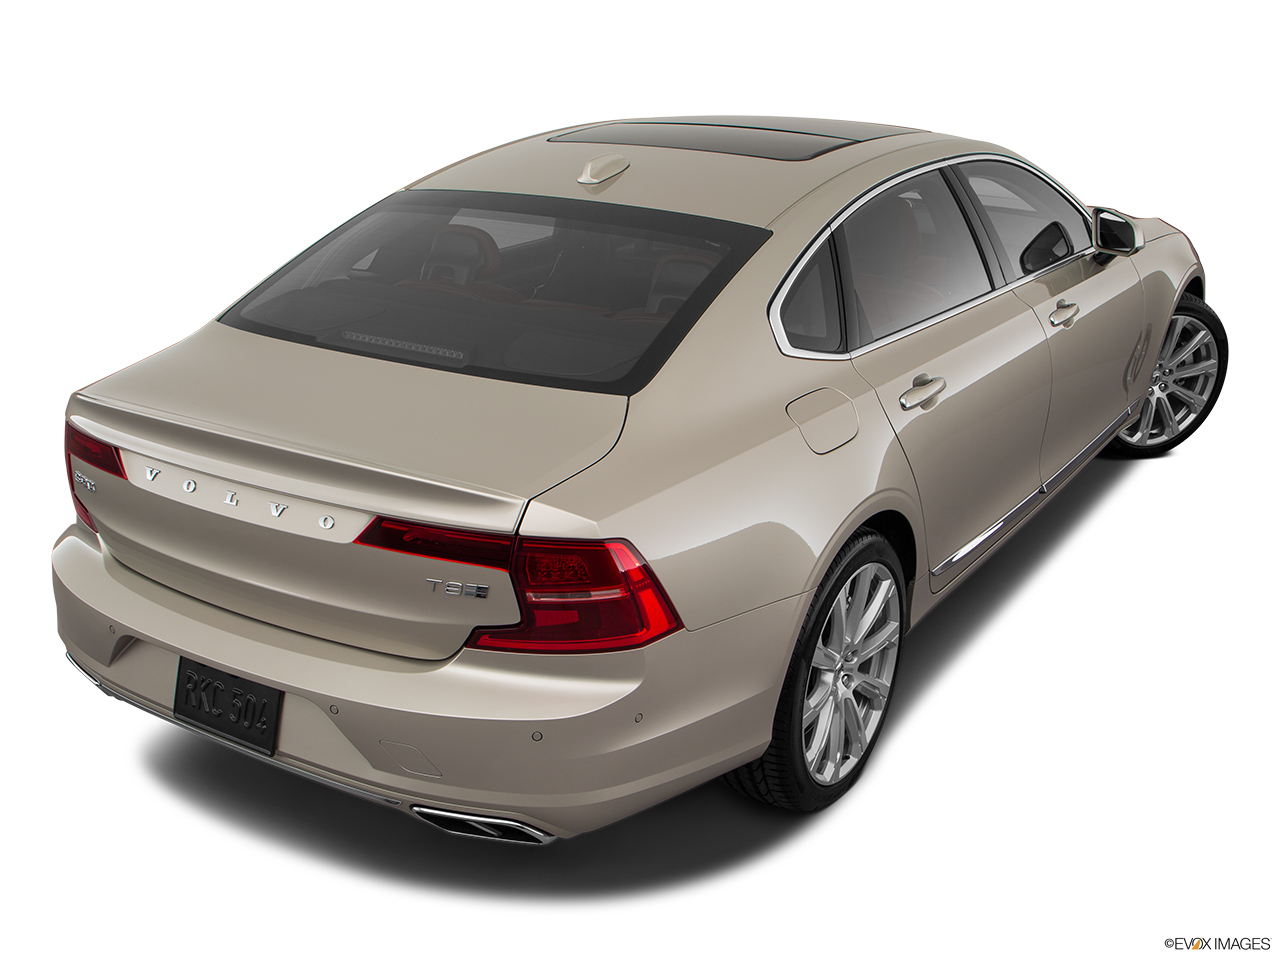 2018 Volvo S90 T8 Inscription eAWD Plug-in Hybrid Rear 3/4 angle view. 